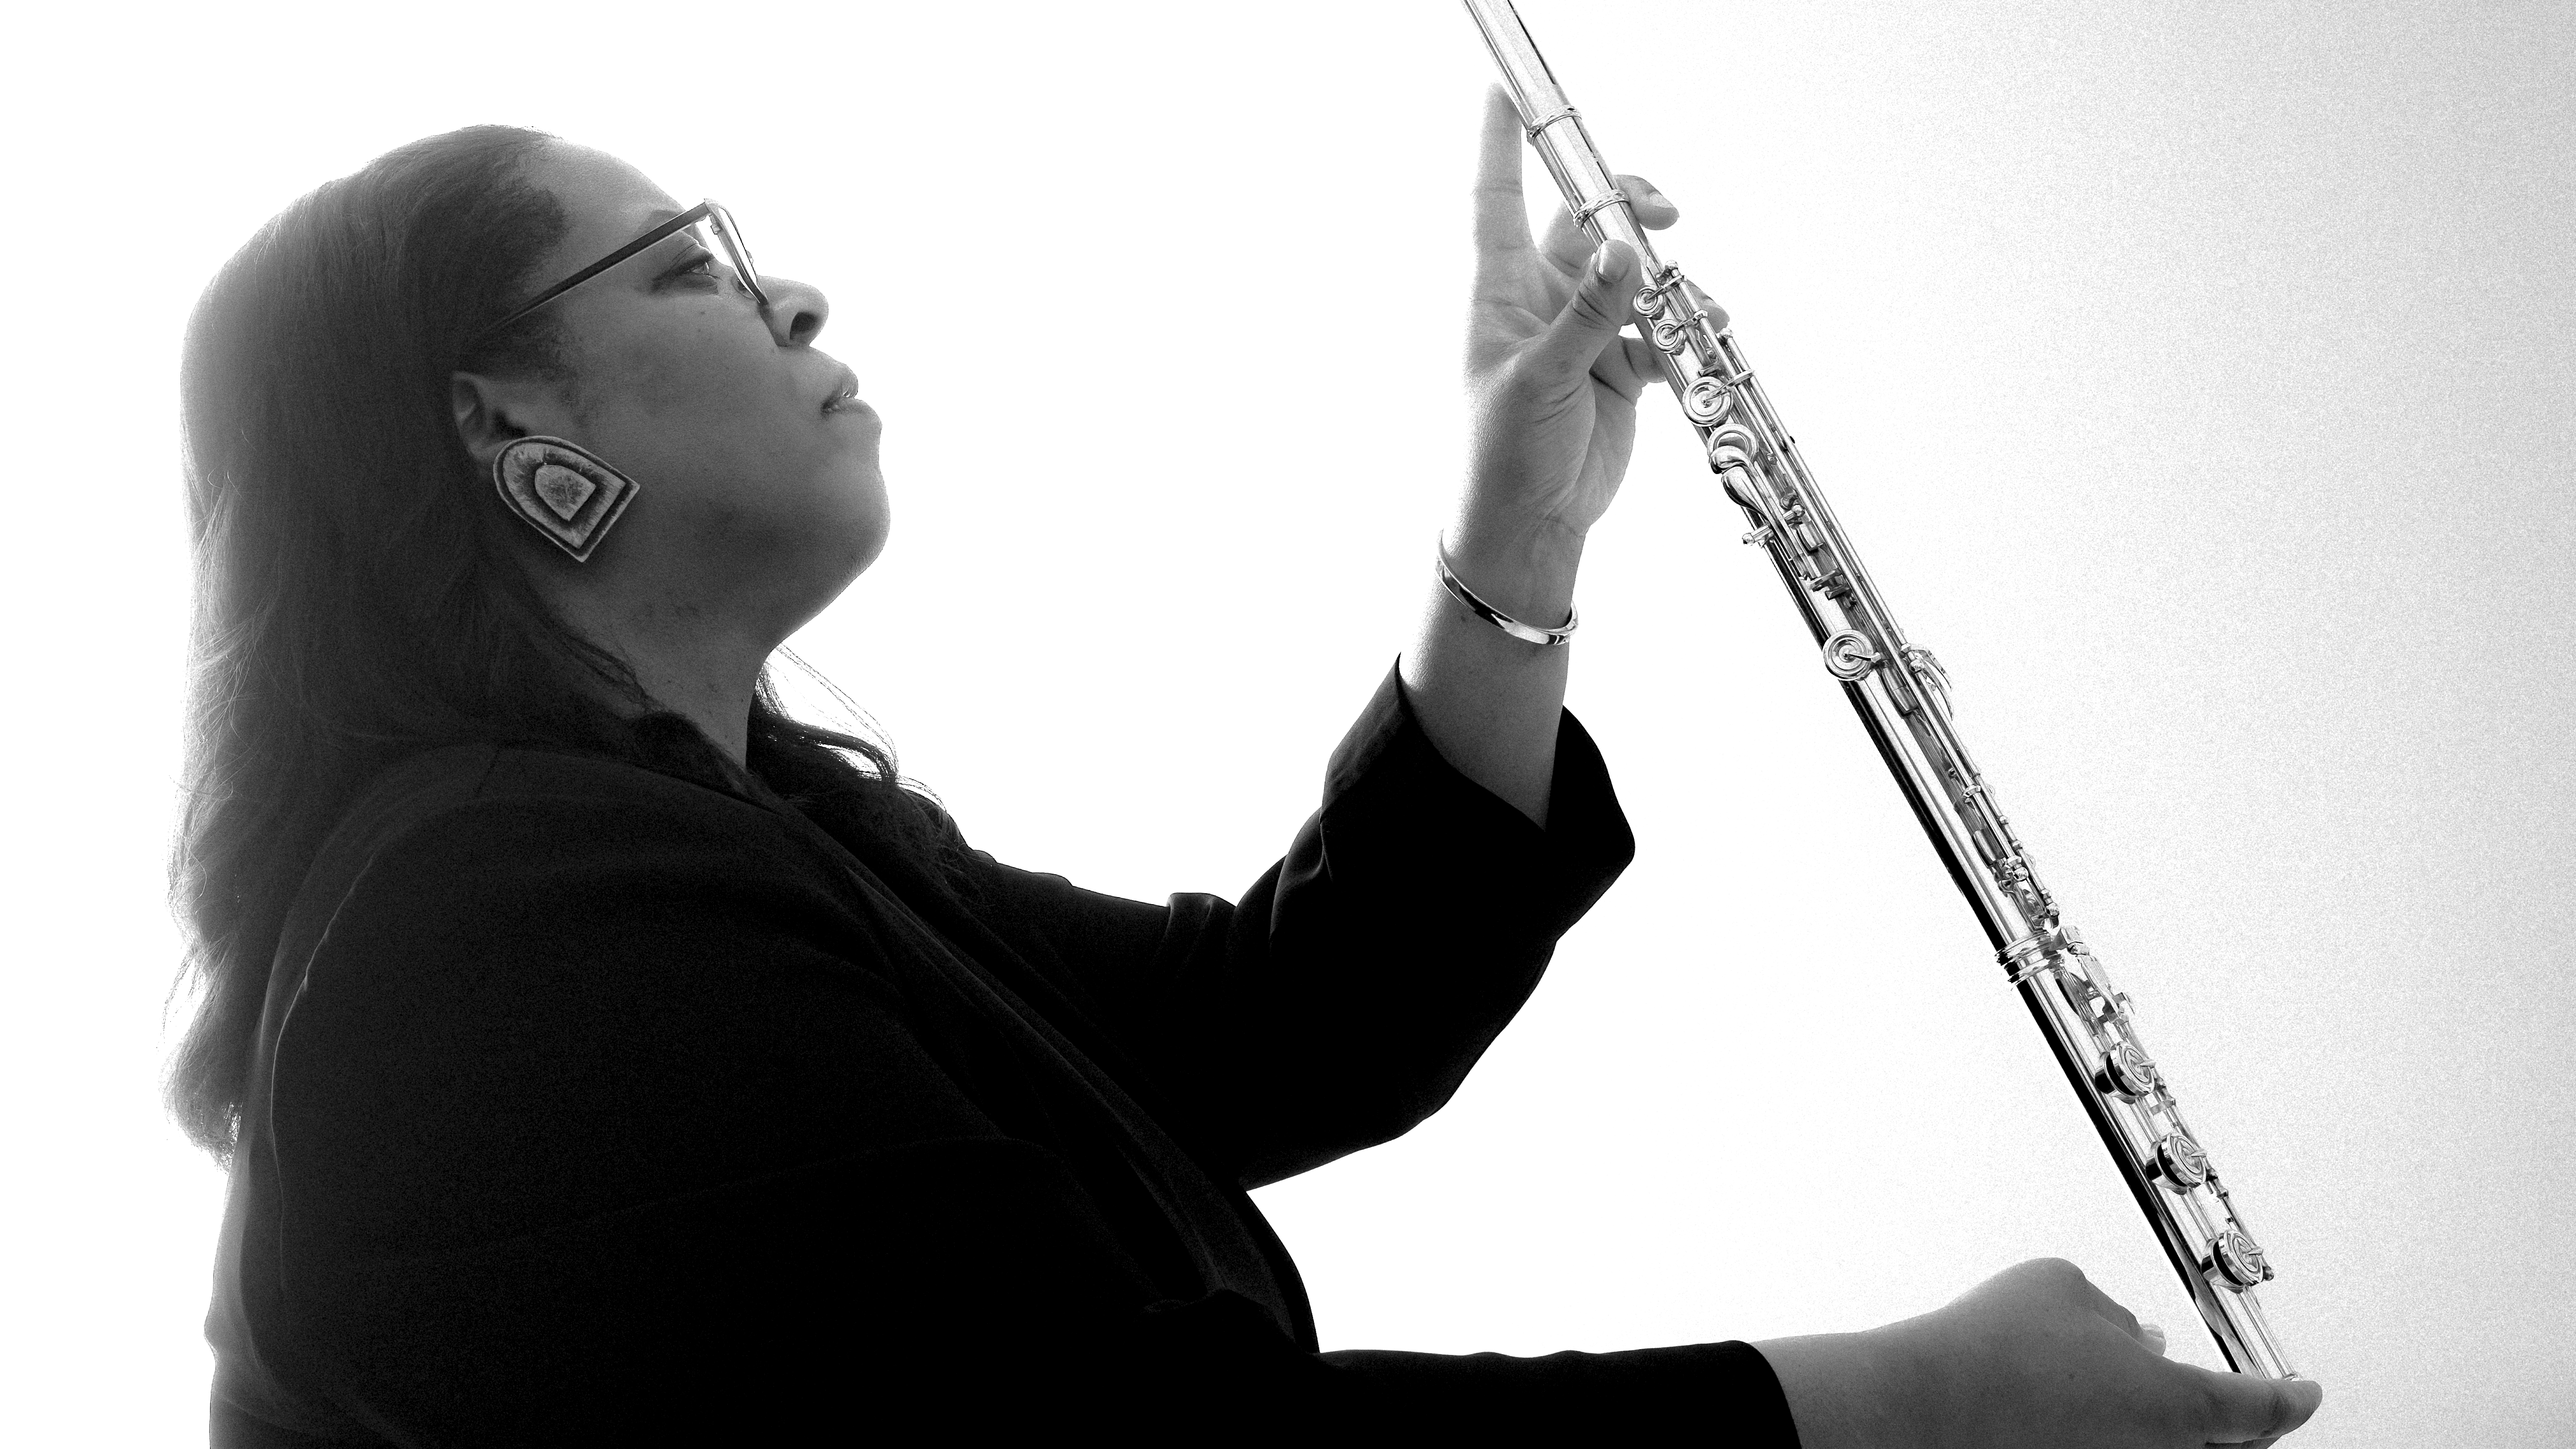 valerie coleman hold a flute and looks up